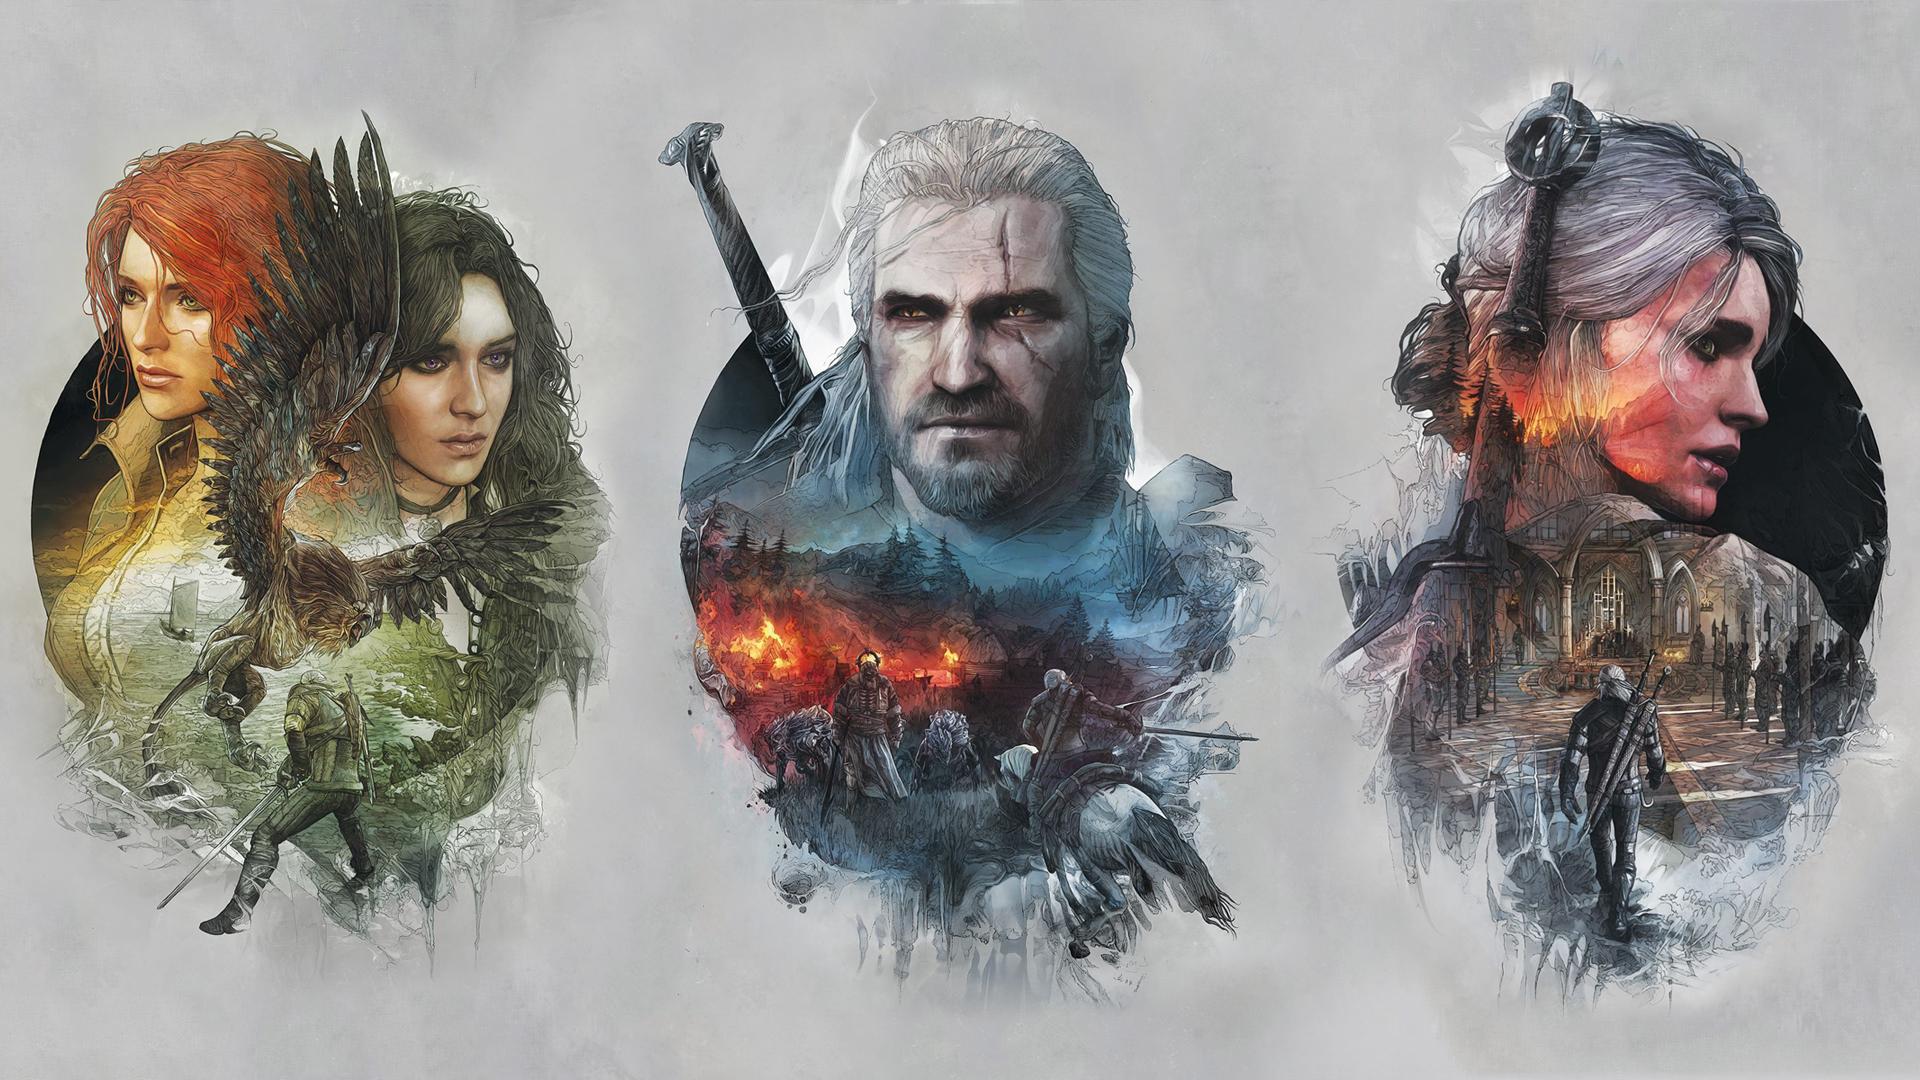 A Witcher 3 Wallpaper I Made By Combining 3 of the Steelbook